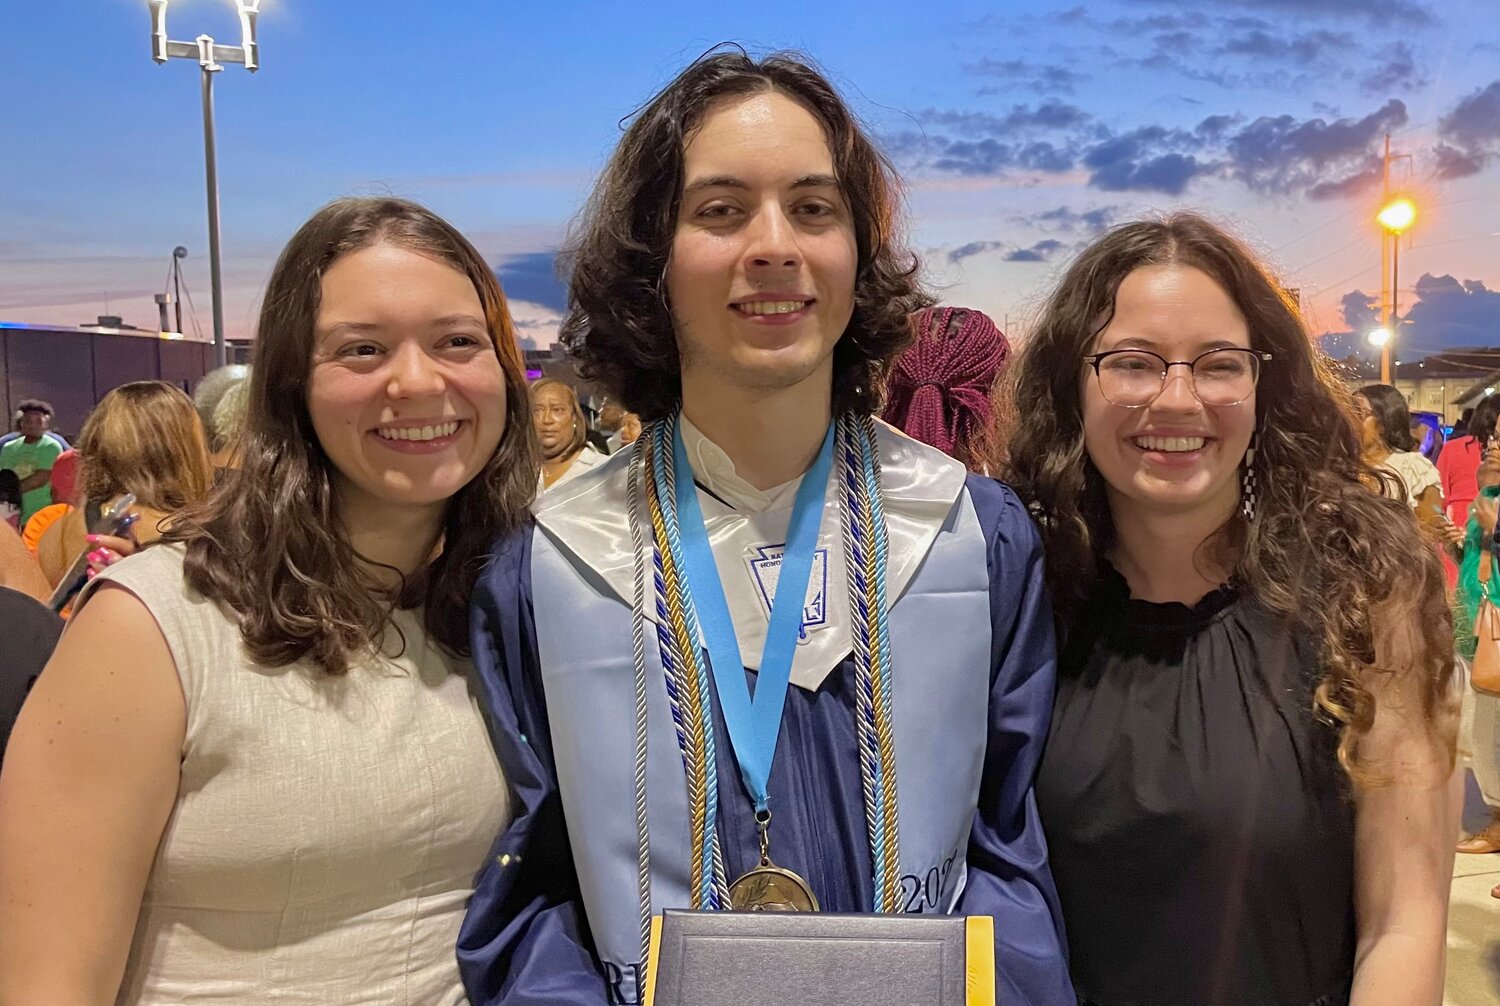 Juliette Richert, Valedictorian of the Class of 2016; Allen Richert, Valedictorian of the Class of 2023; and Claire Richert, Valedictorian of the Class of 2020, gather for a photo May 17, at the Ridgeland High School graduation at the Mississippi Coliseum in Jackson.